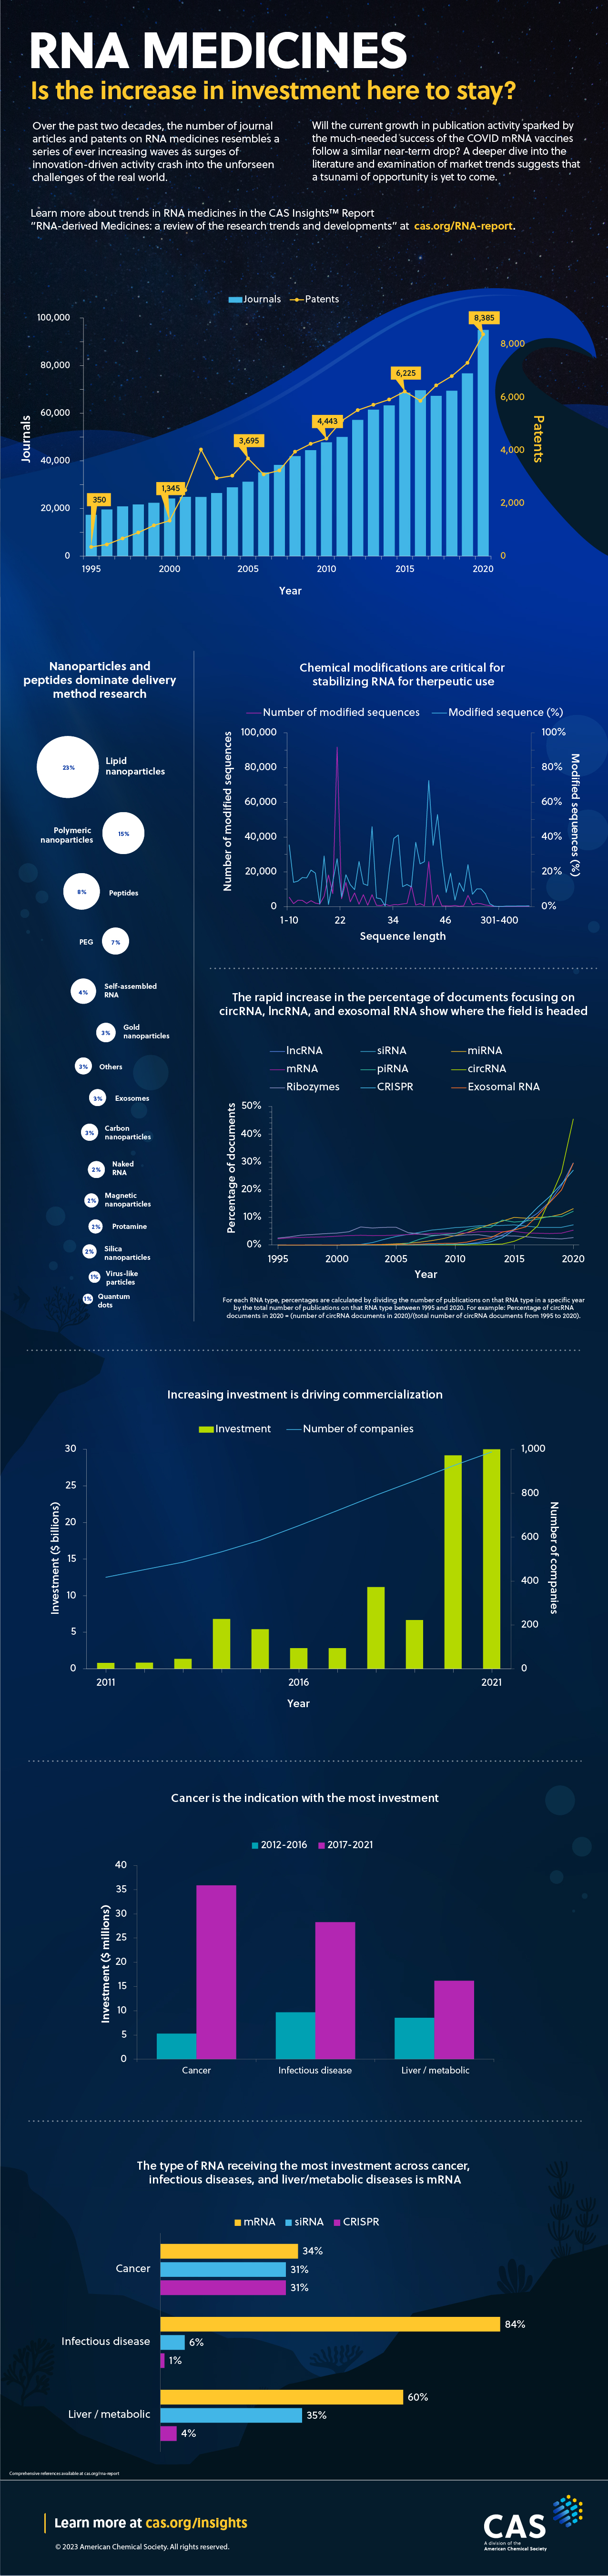 RNA therapeutics are transforming medicine in our new infographic